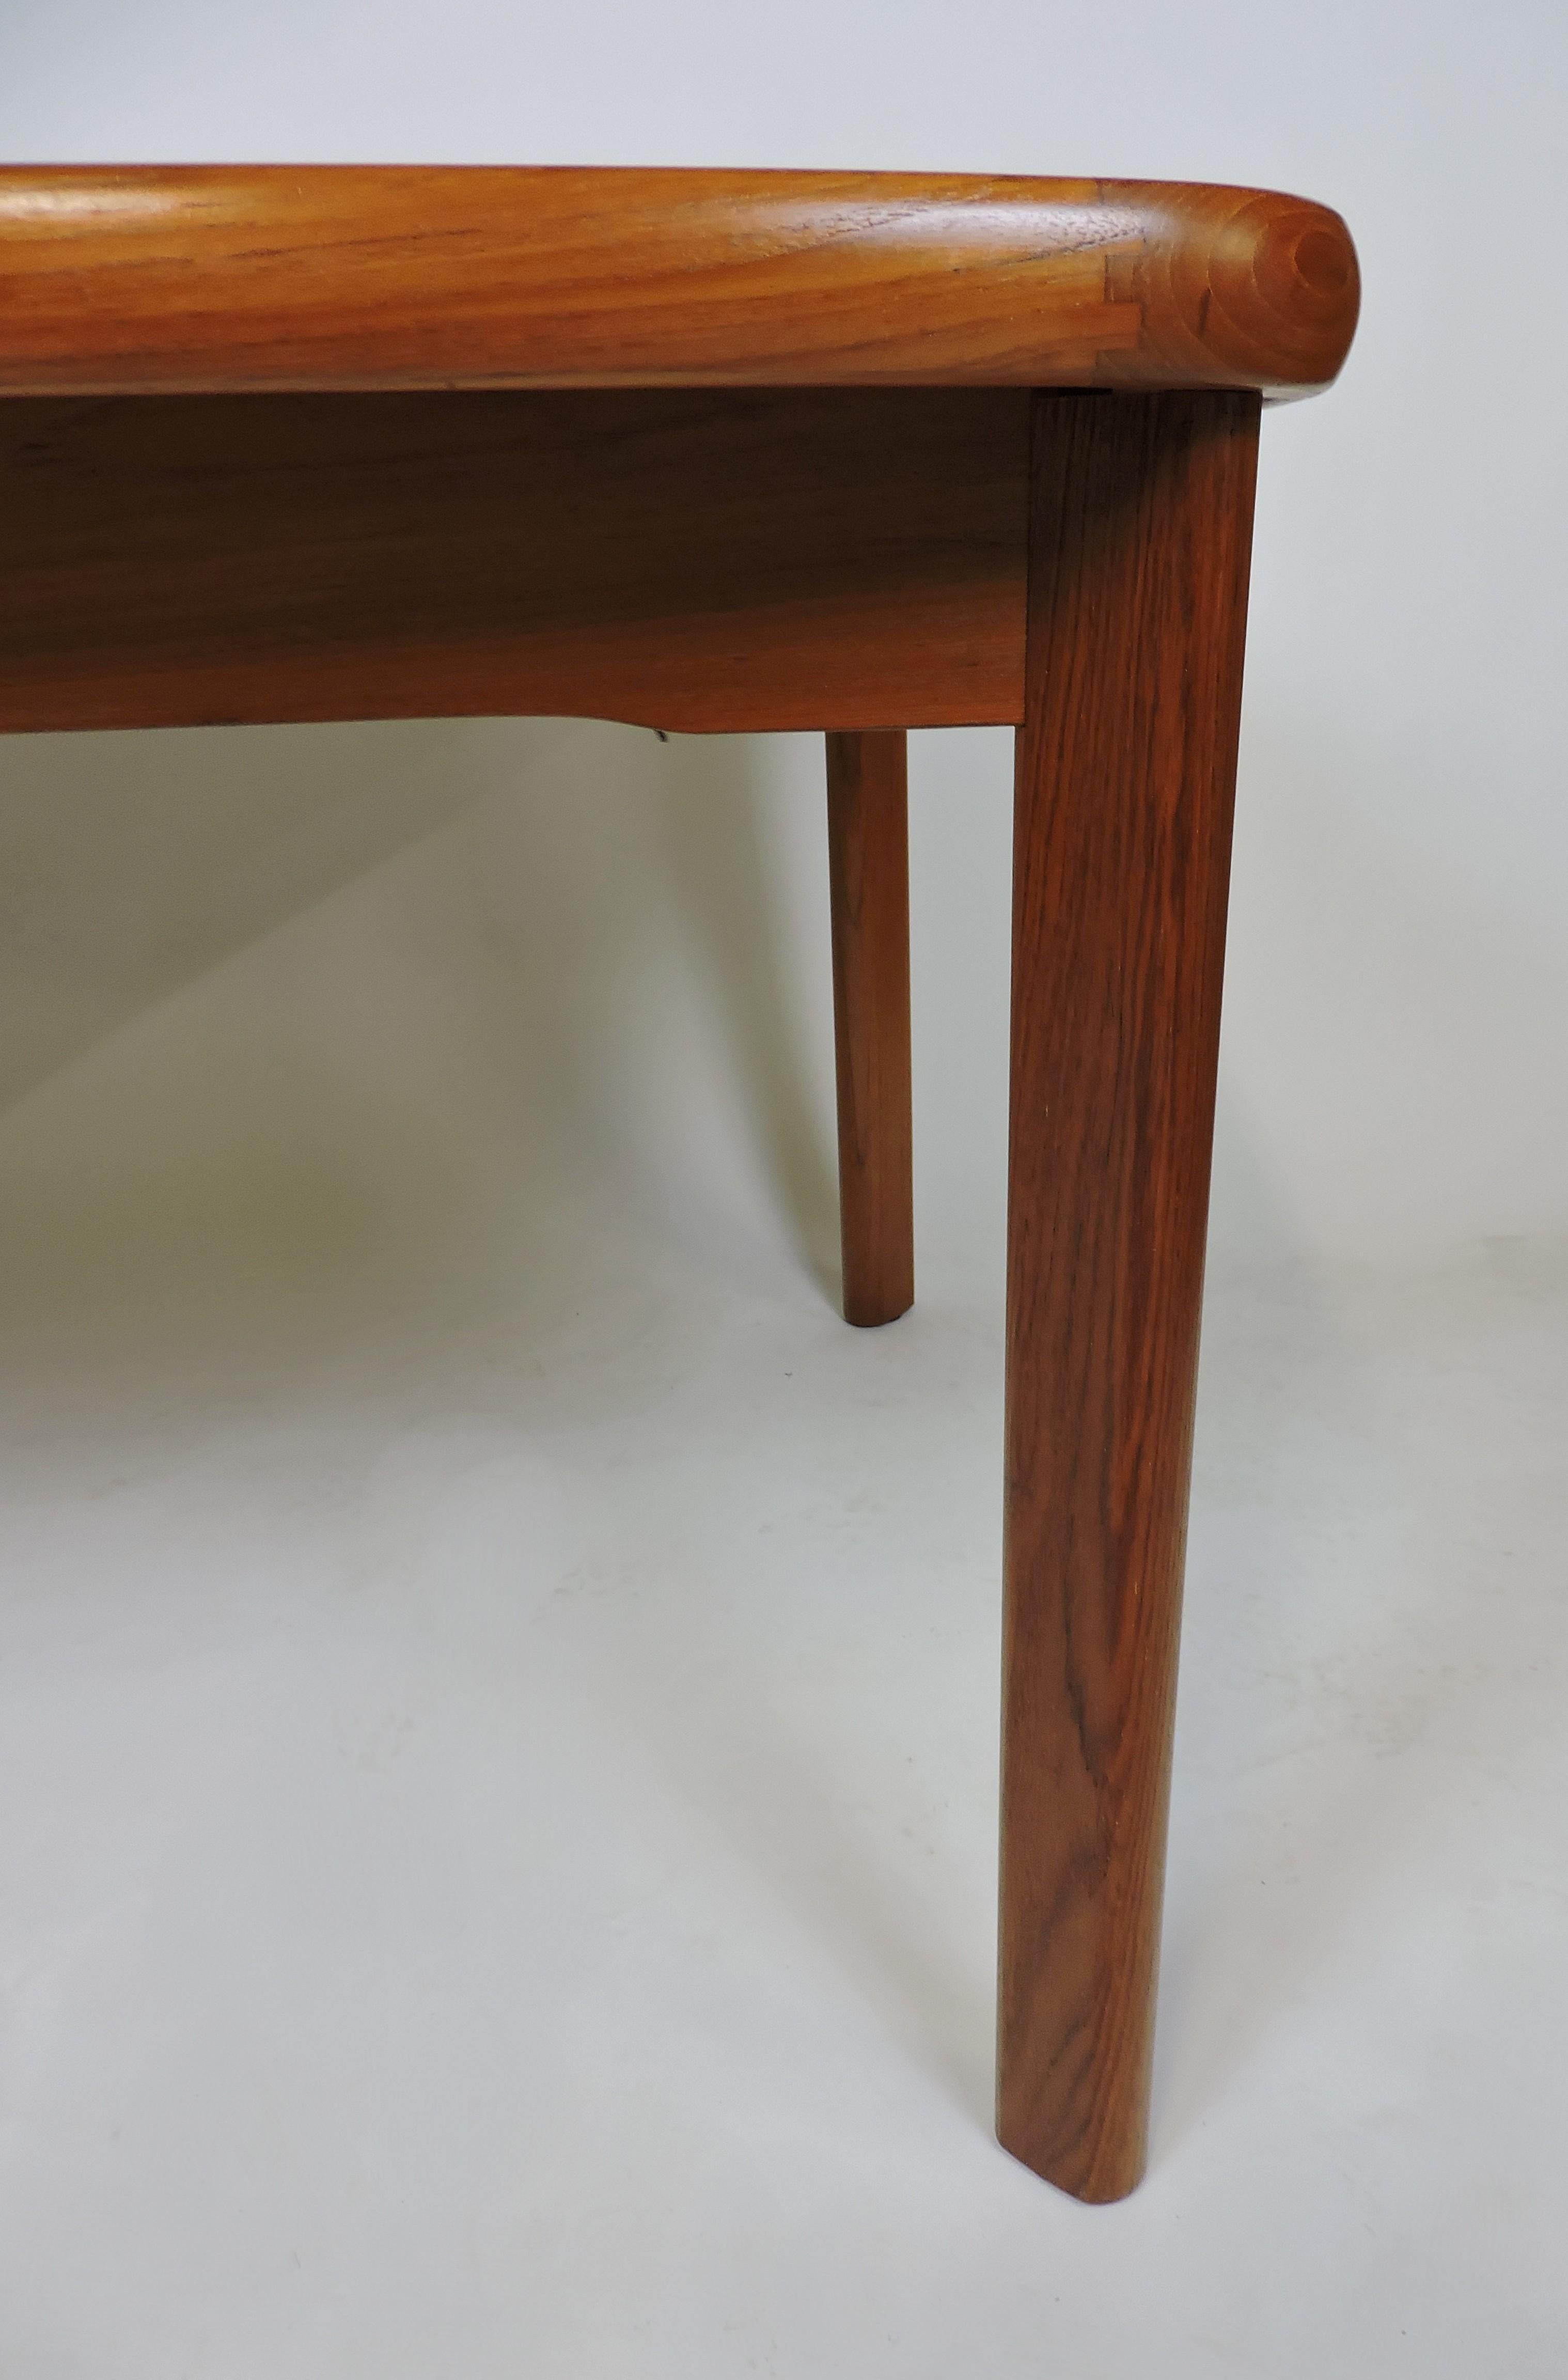 Danish Modern Design Extendable Teak Dining Table with Butterfly Leaf 1